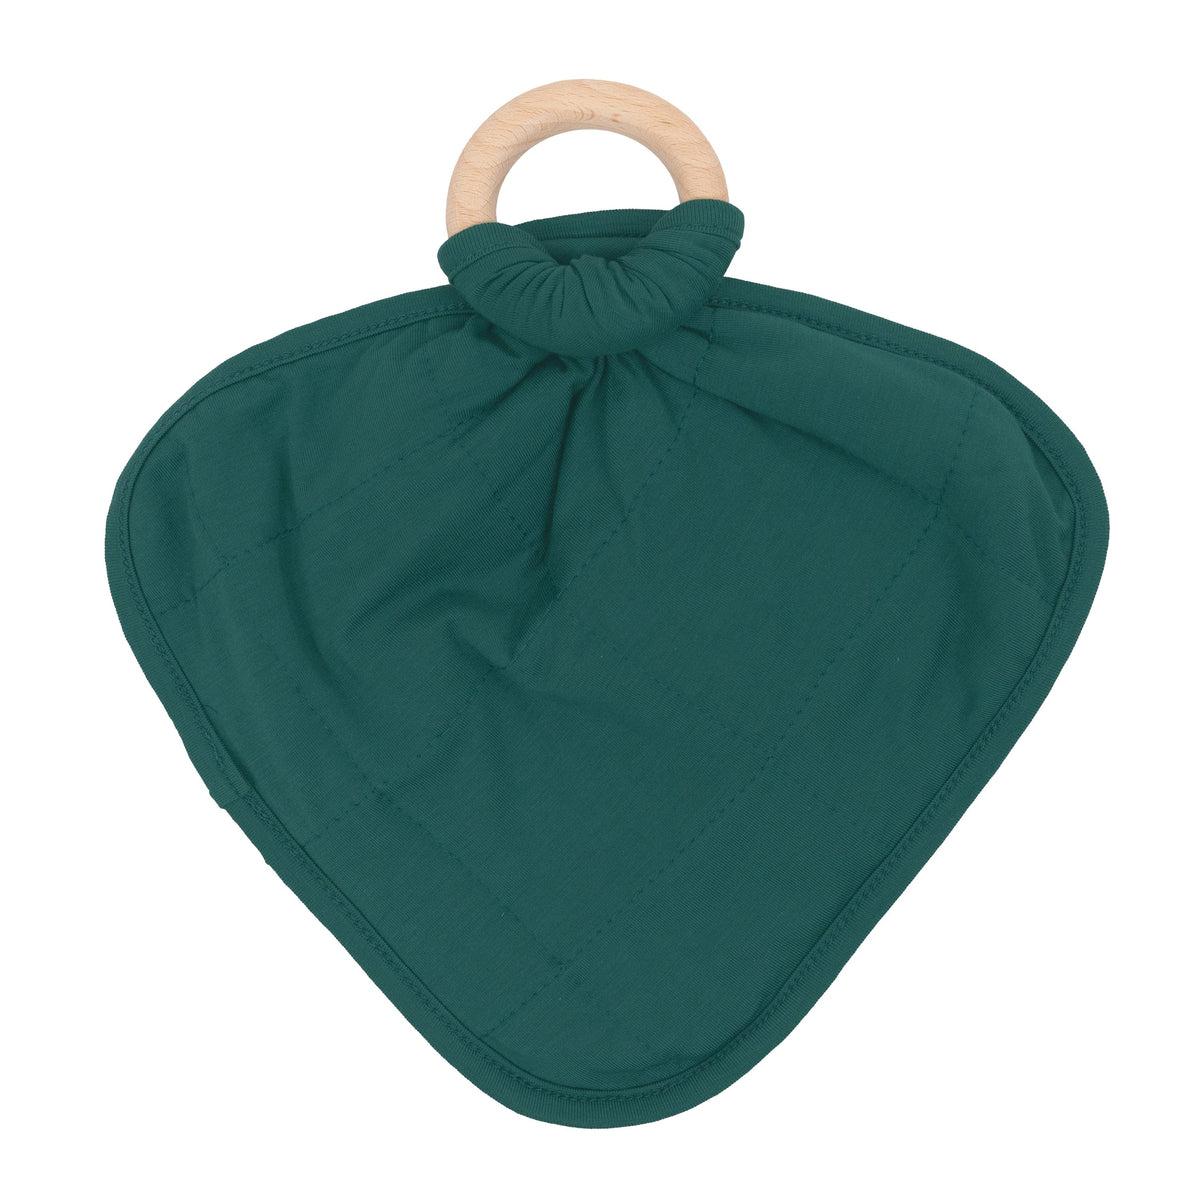 Kyte Baby Lovey Emerald / Infant Lovey in Emerald with Removable Wooden Teething Ring